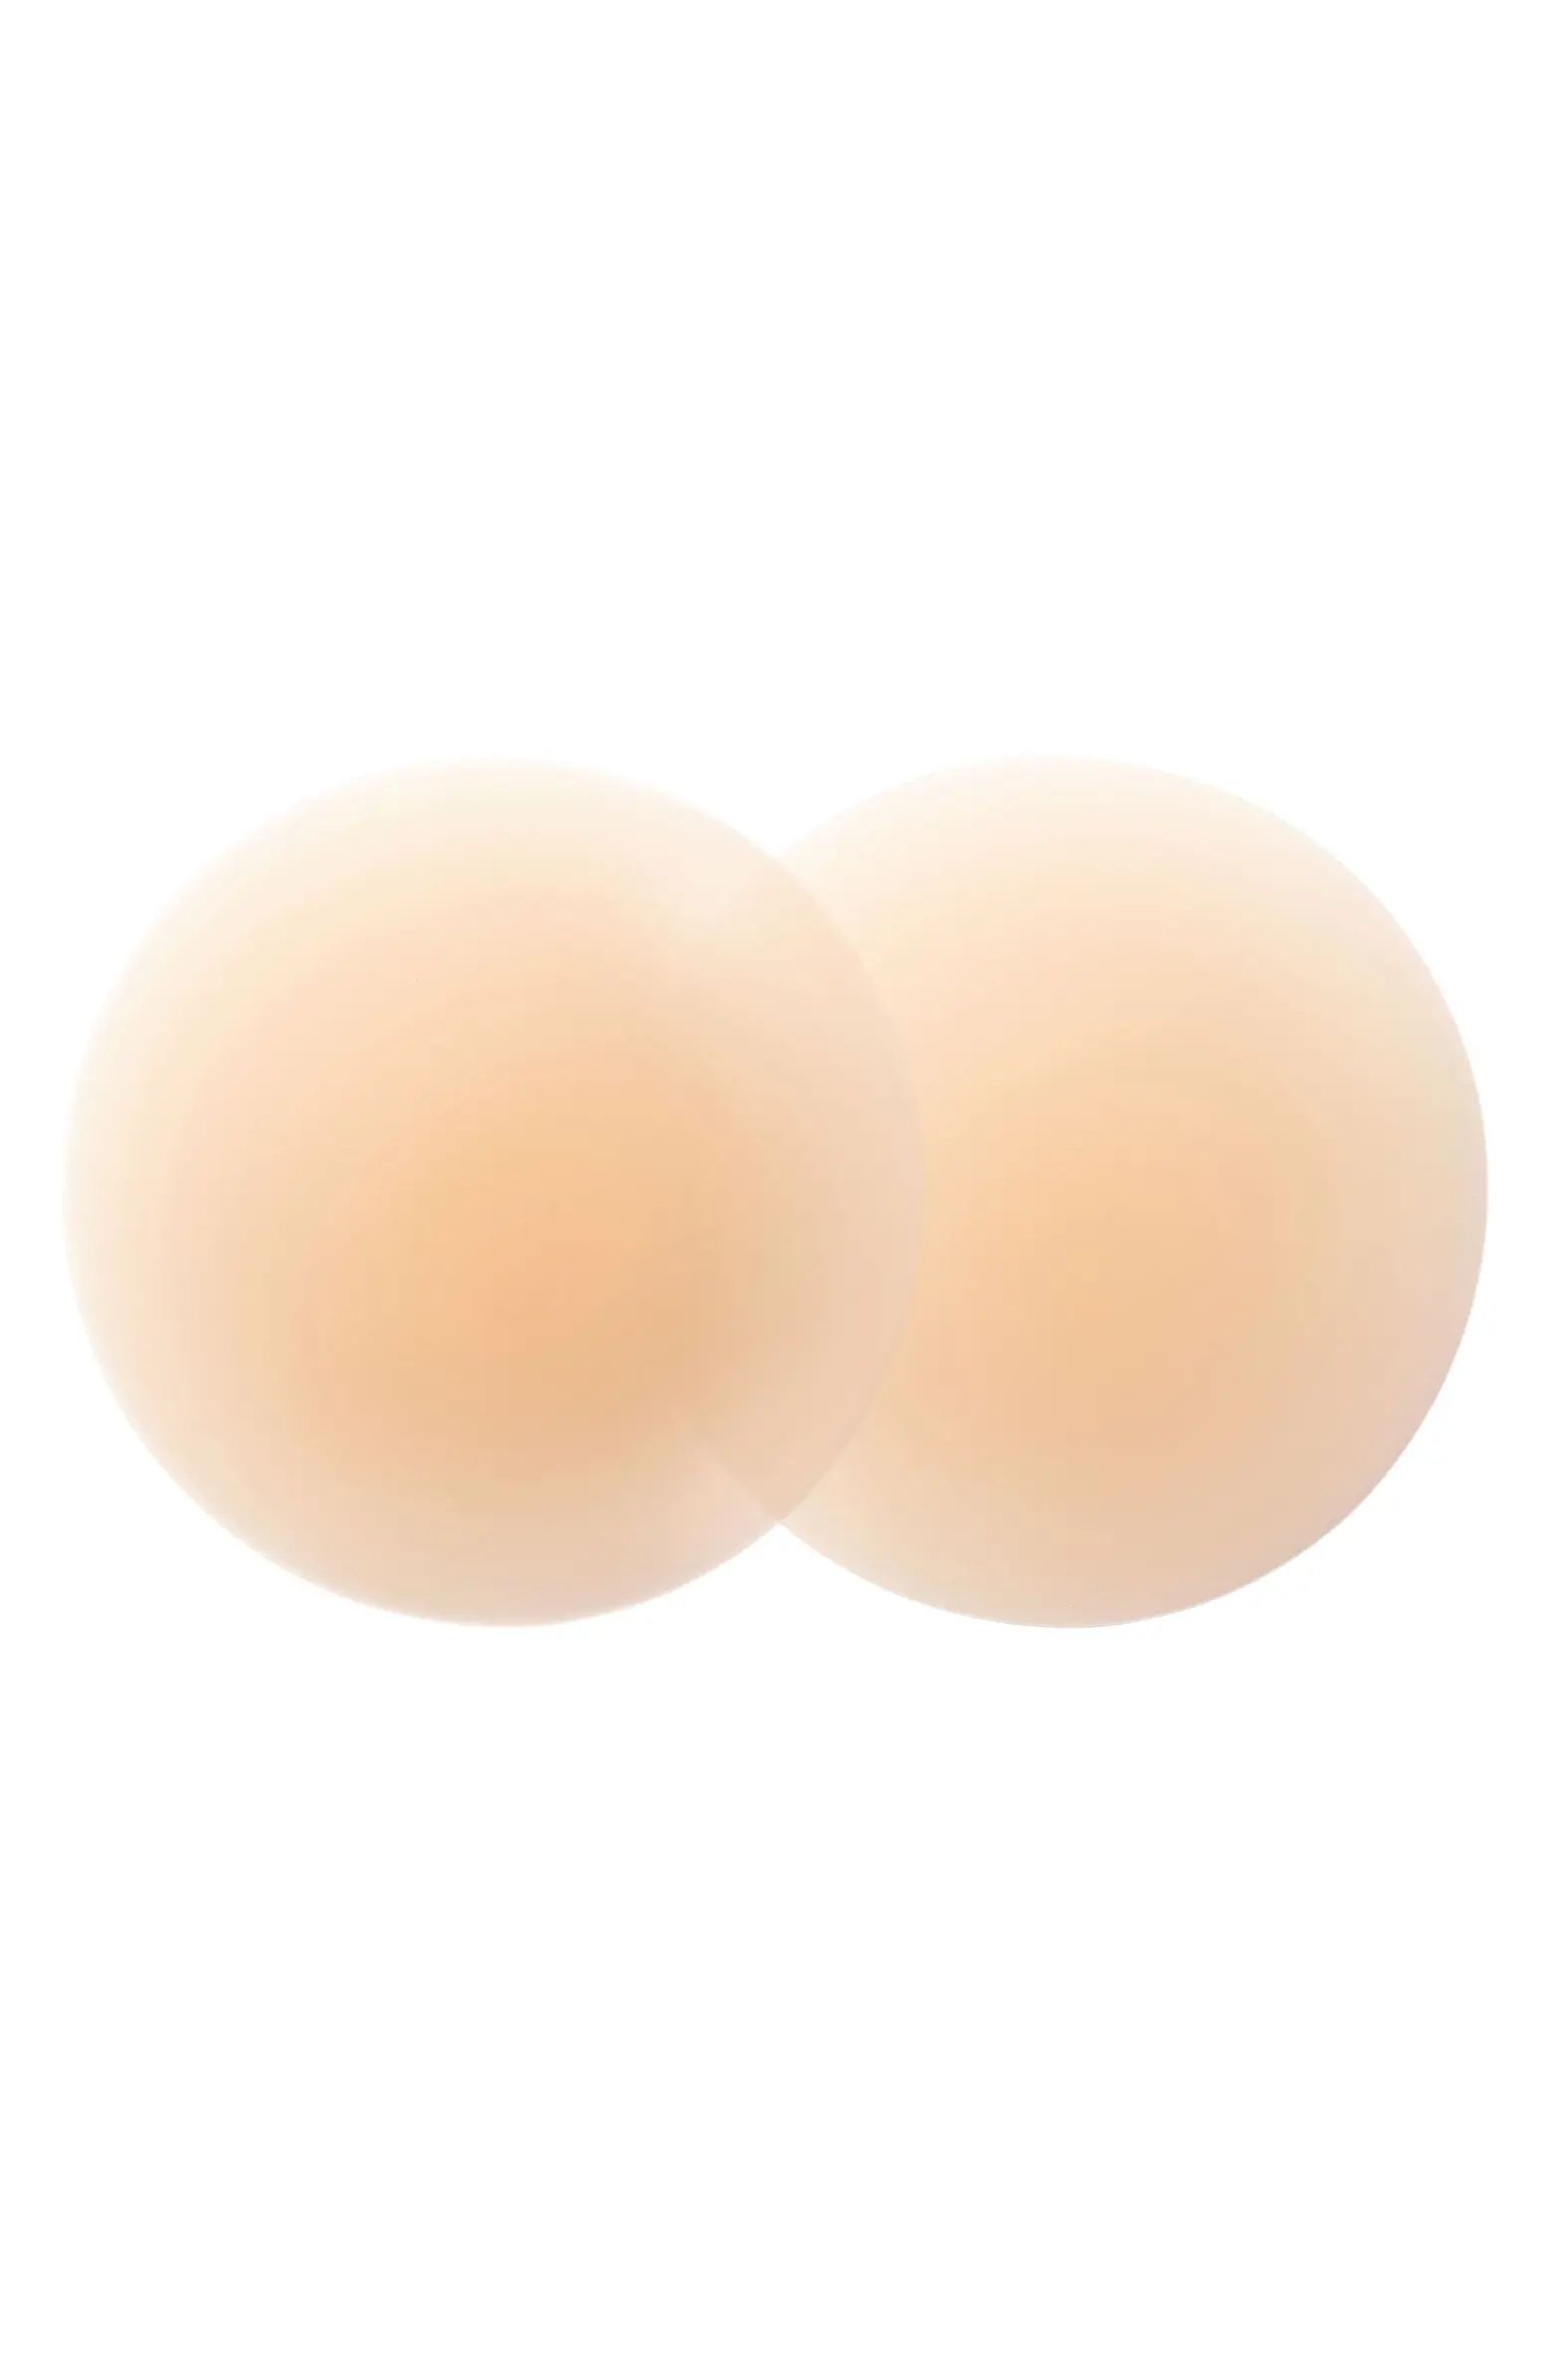 Bristols 6 Nippies by Bristols Six Skin Reusable Adhesive Nipple Covers | Nordstrom | Nordstrom Canada